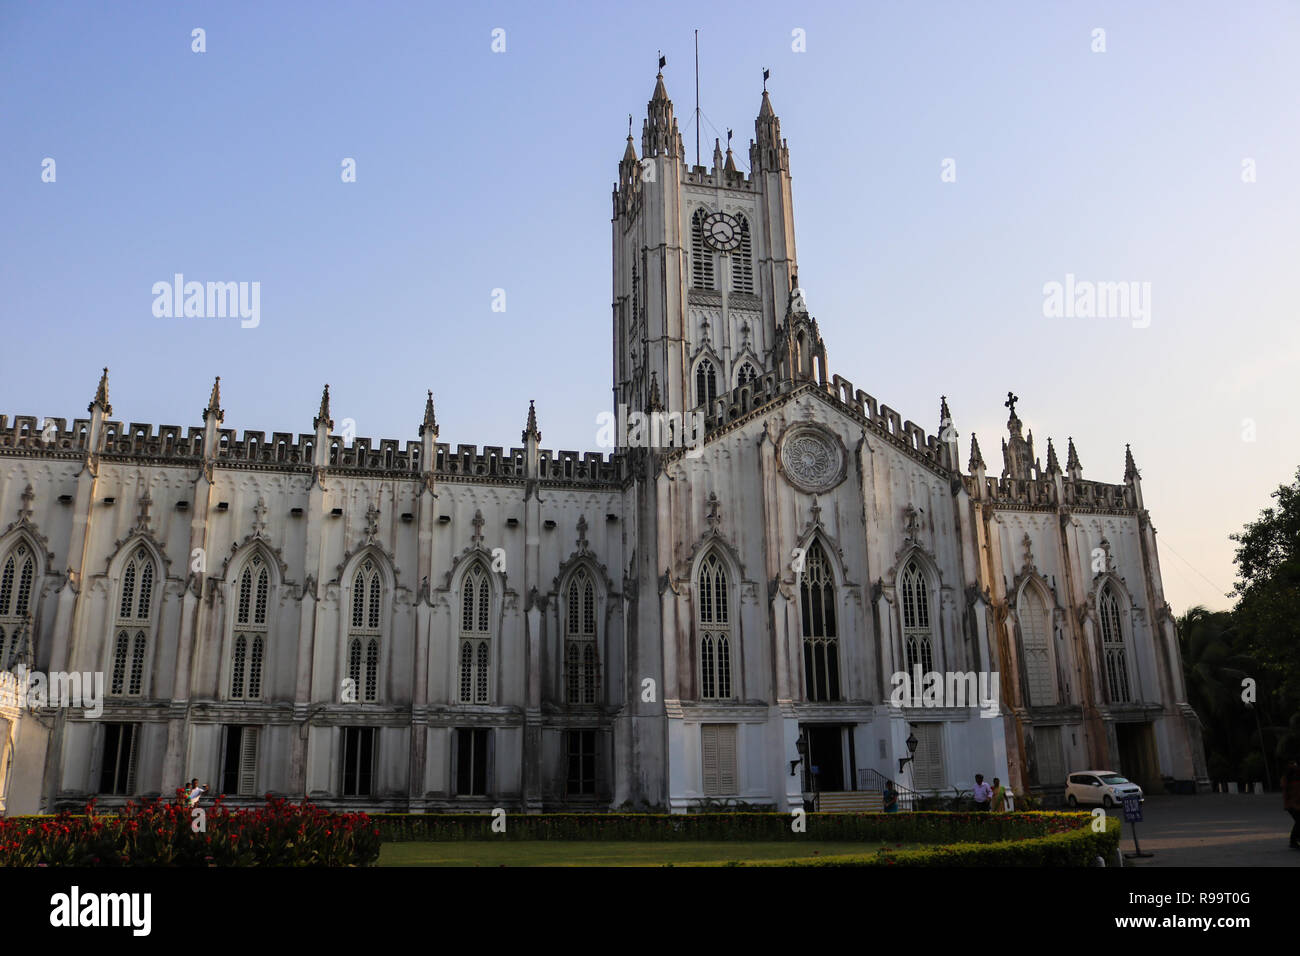 St. Paul's Cathedral is a CNI Cathedral of Anglican background in Kolkata, West Bengal, India, noted for its Gothic architecture. Stock Photo